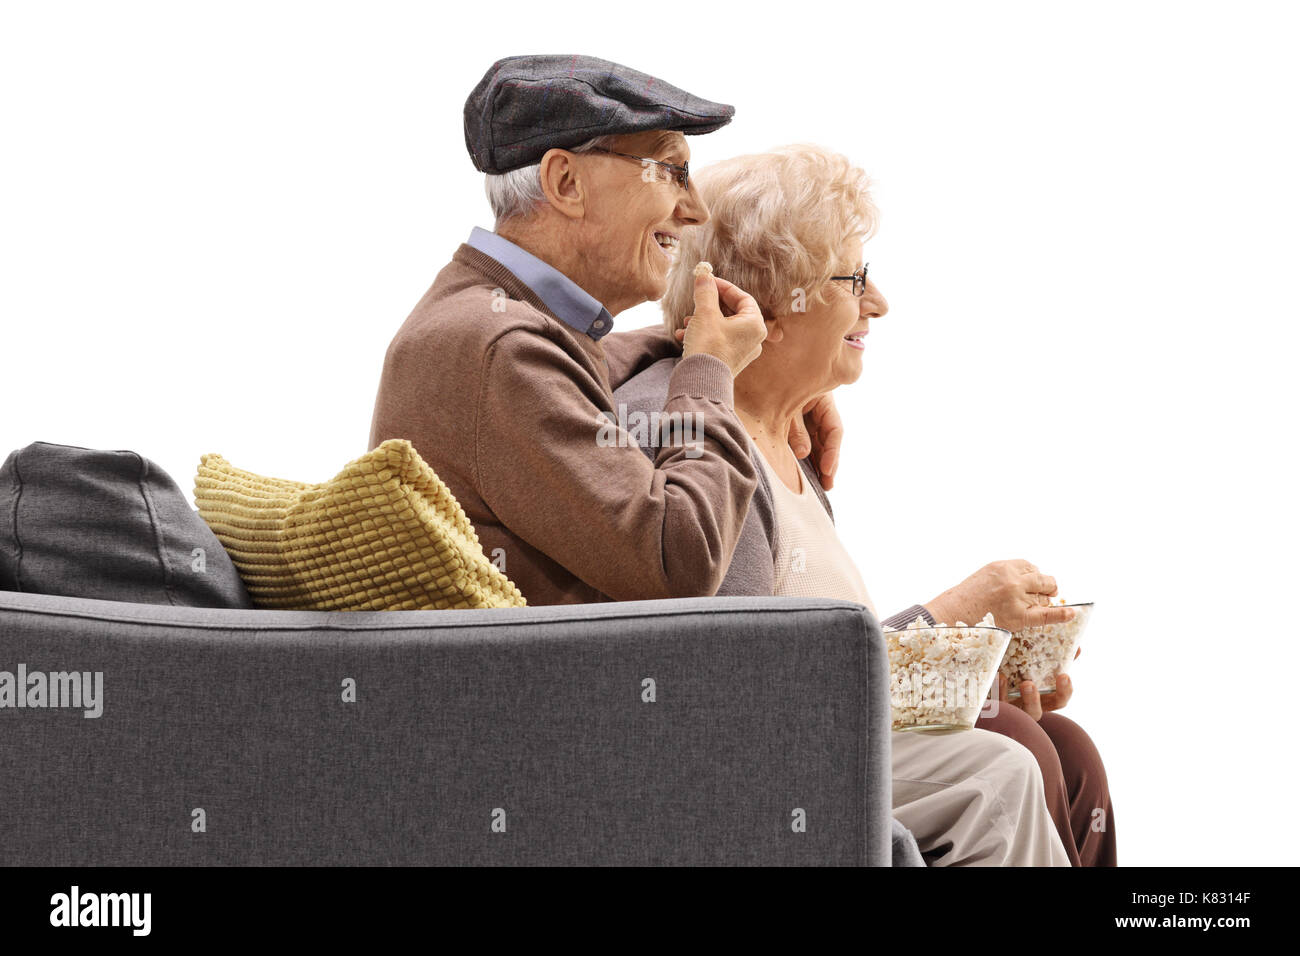 Elderly man and woman sitting on a sofa and eating popcorn isolated on white background Stock Photo